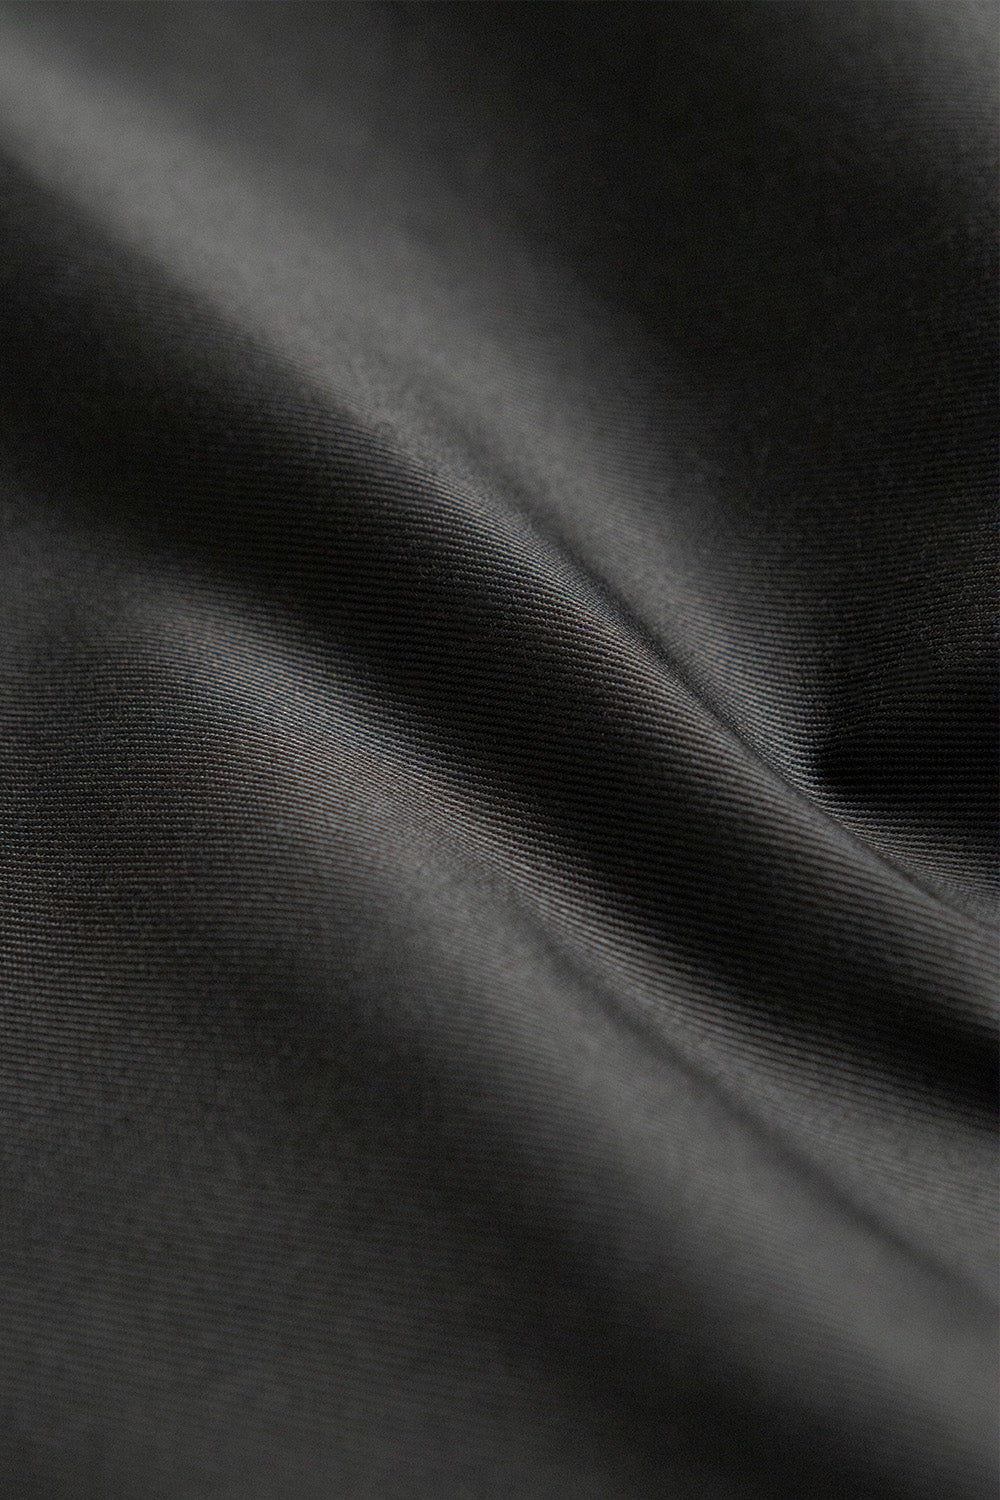 100% cotton fabric in true black color - perfect for sewing kits and crafting projects